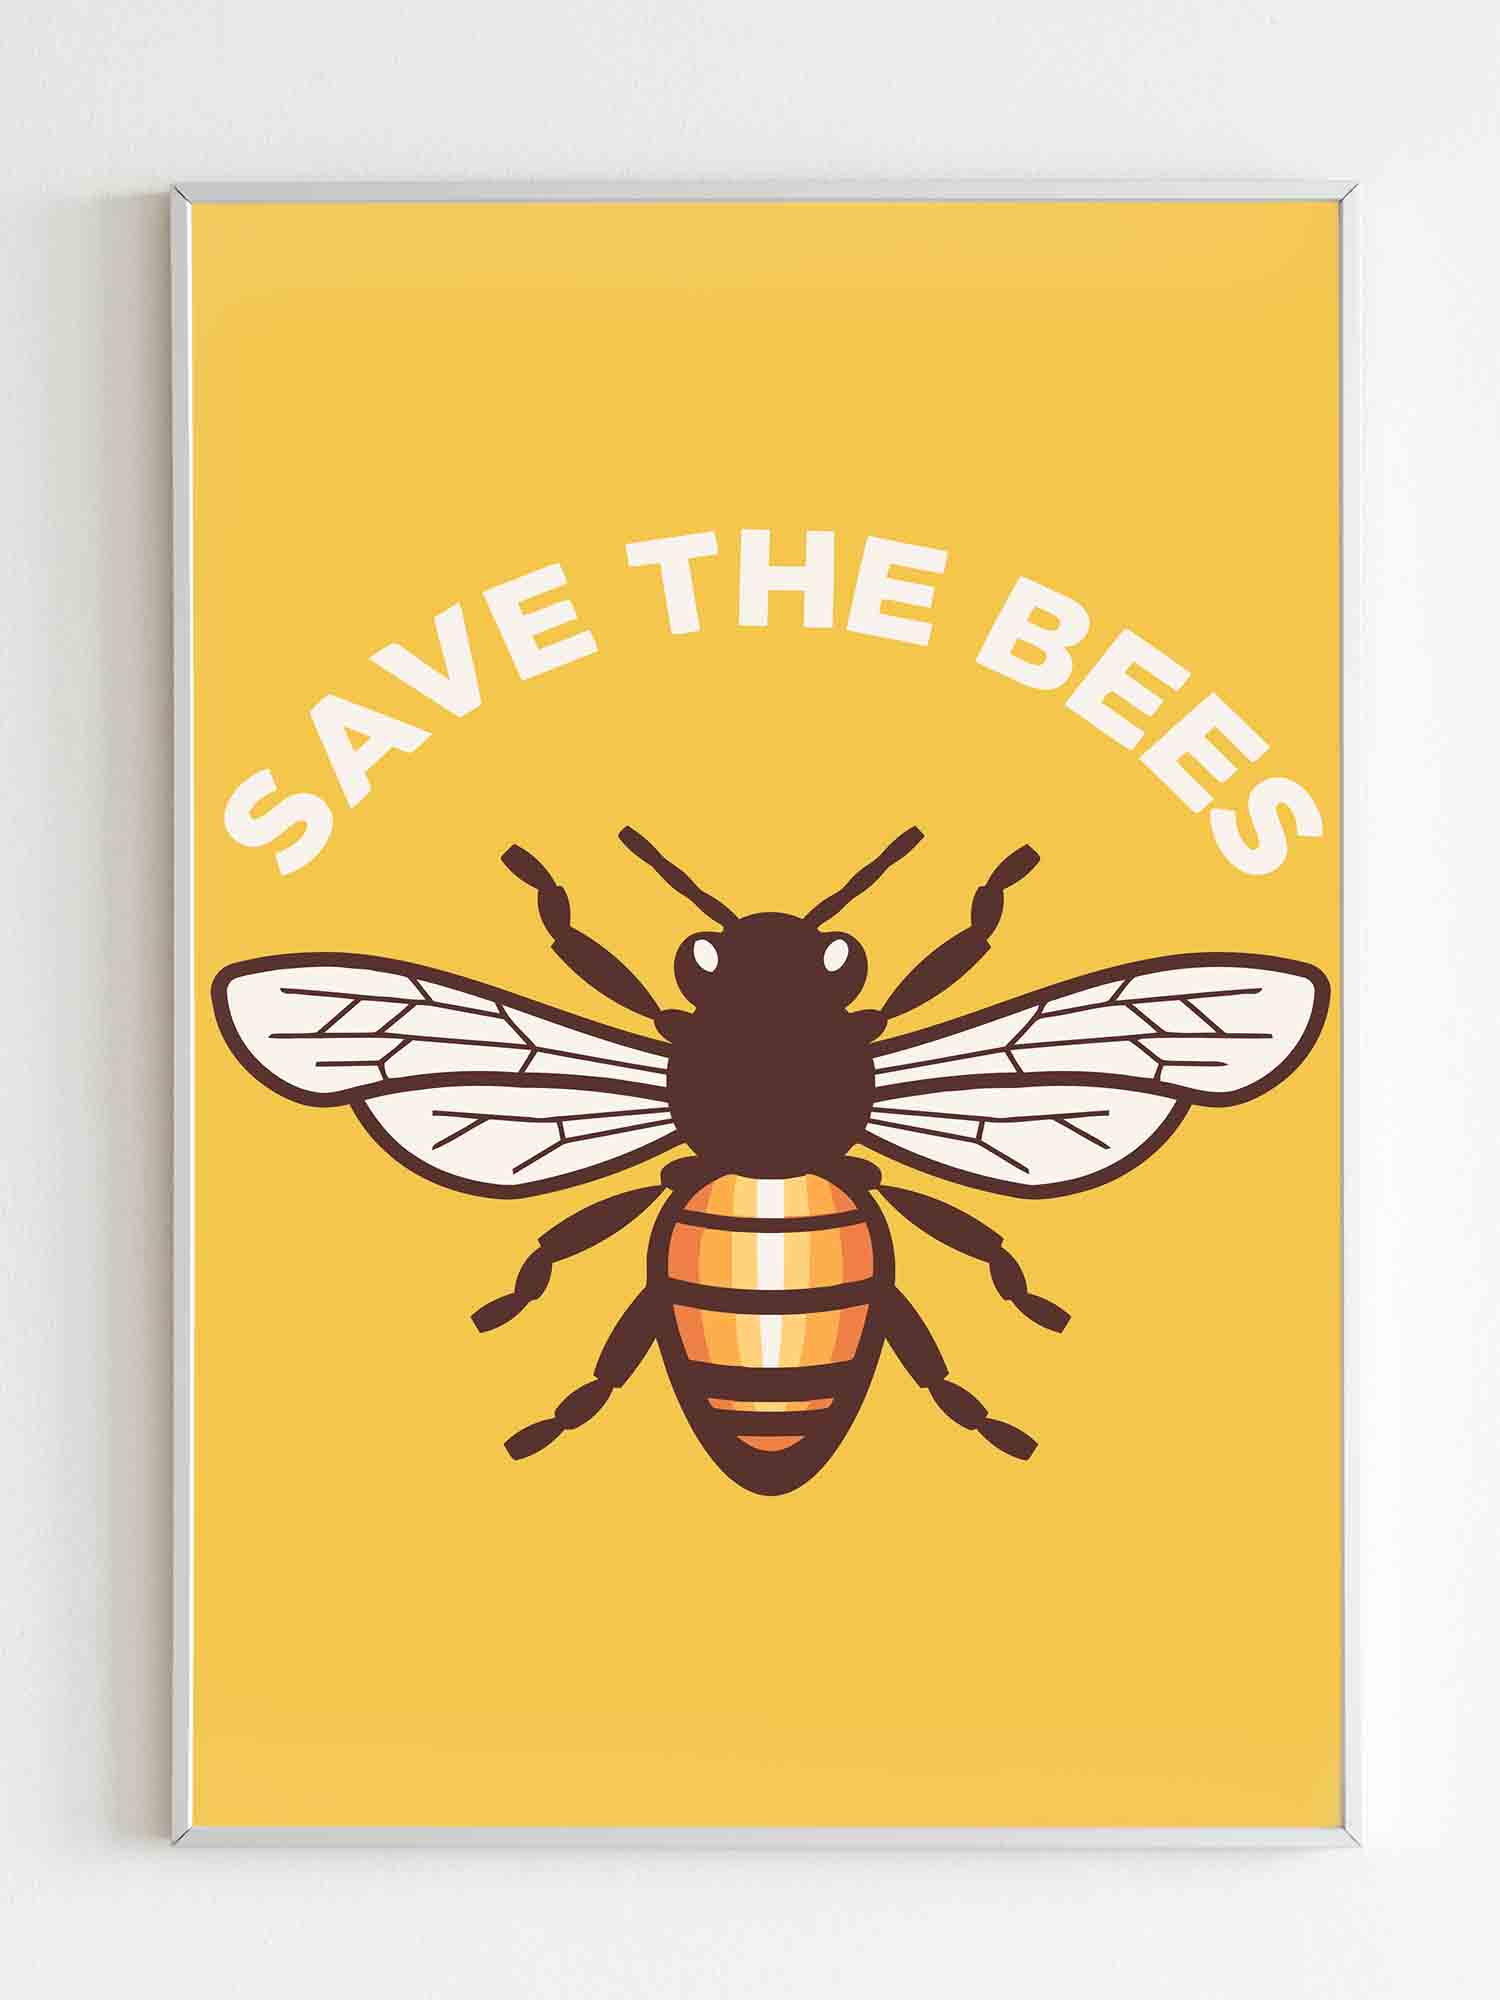 Save The Honey Bees Poster Poster Art Design